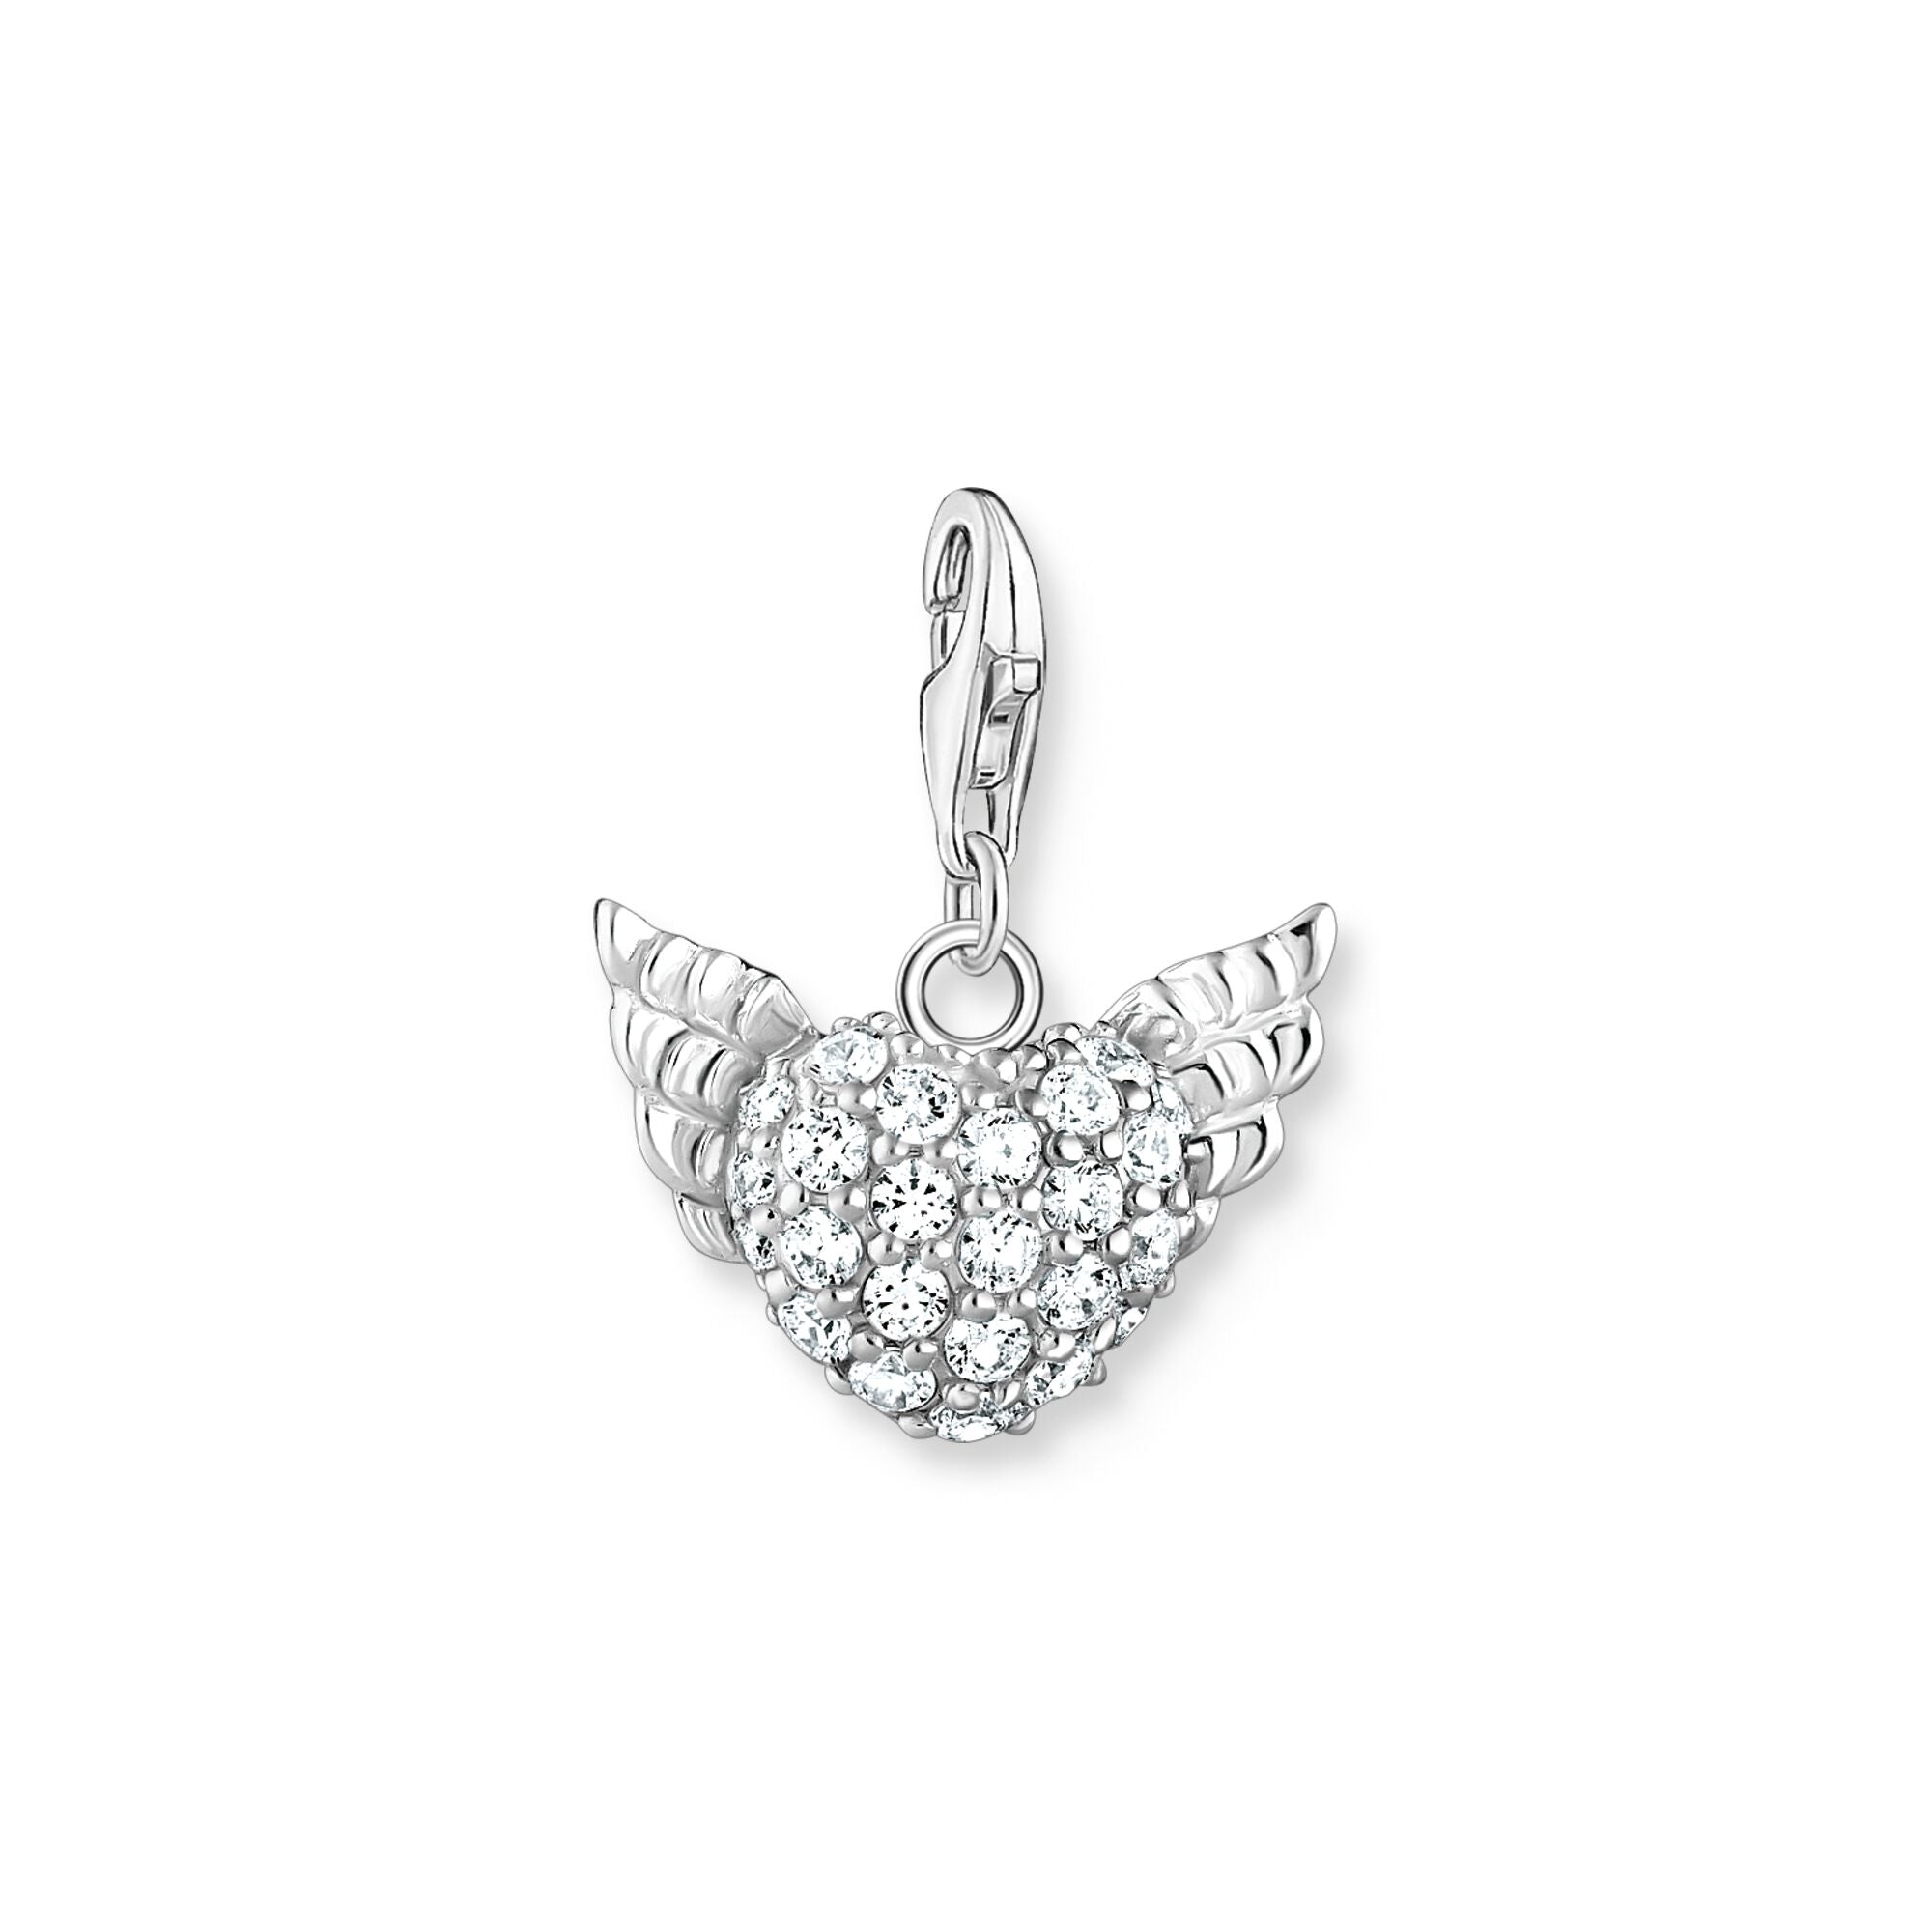 Thomas Sabo Sterling Silver Winged Heart Charm